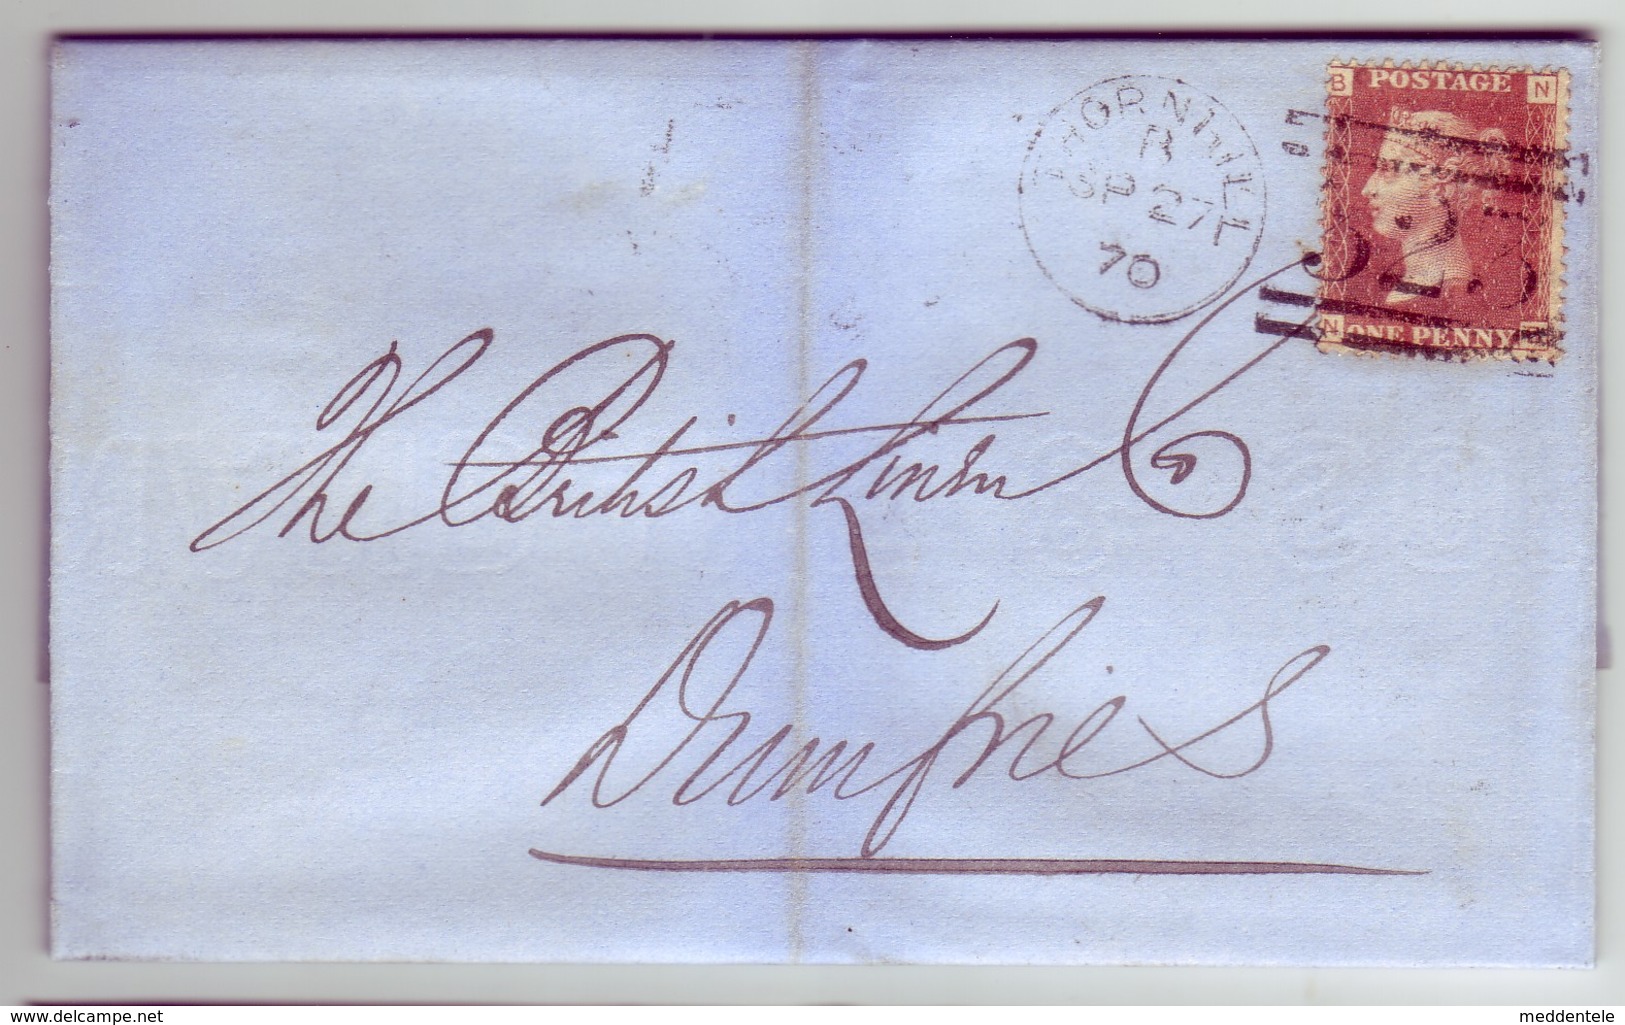 GB QV Scotland Cancel 323 THORNHILL Plate 121,  27 SEPT 1870 To DUMFRIES Lettered BN/NB NICE/Clean - Briefe U. Dokumente